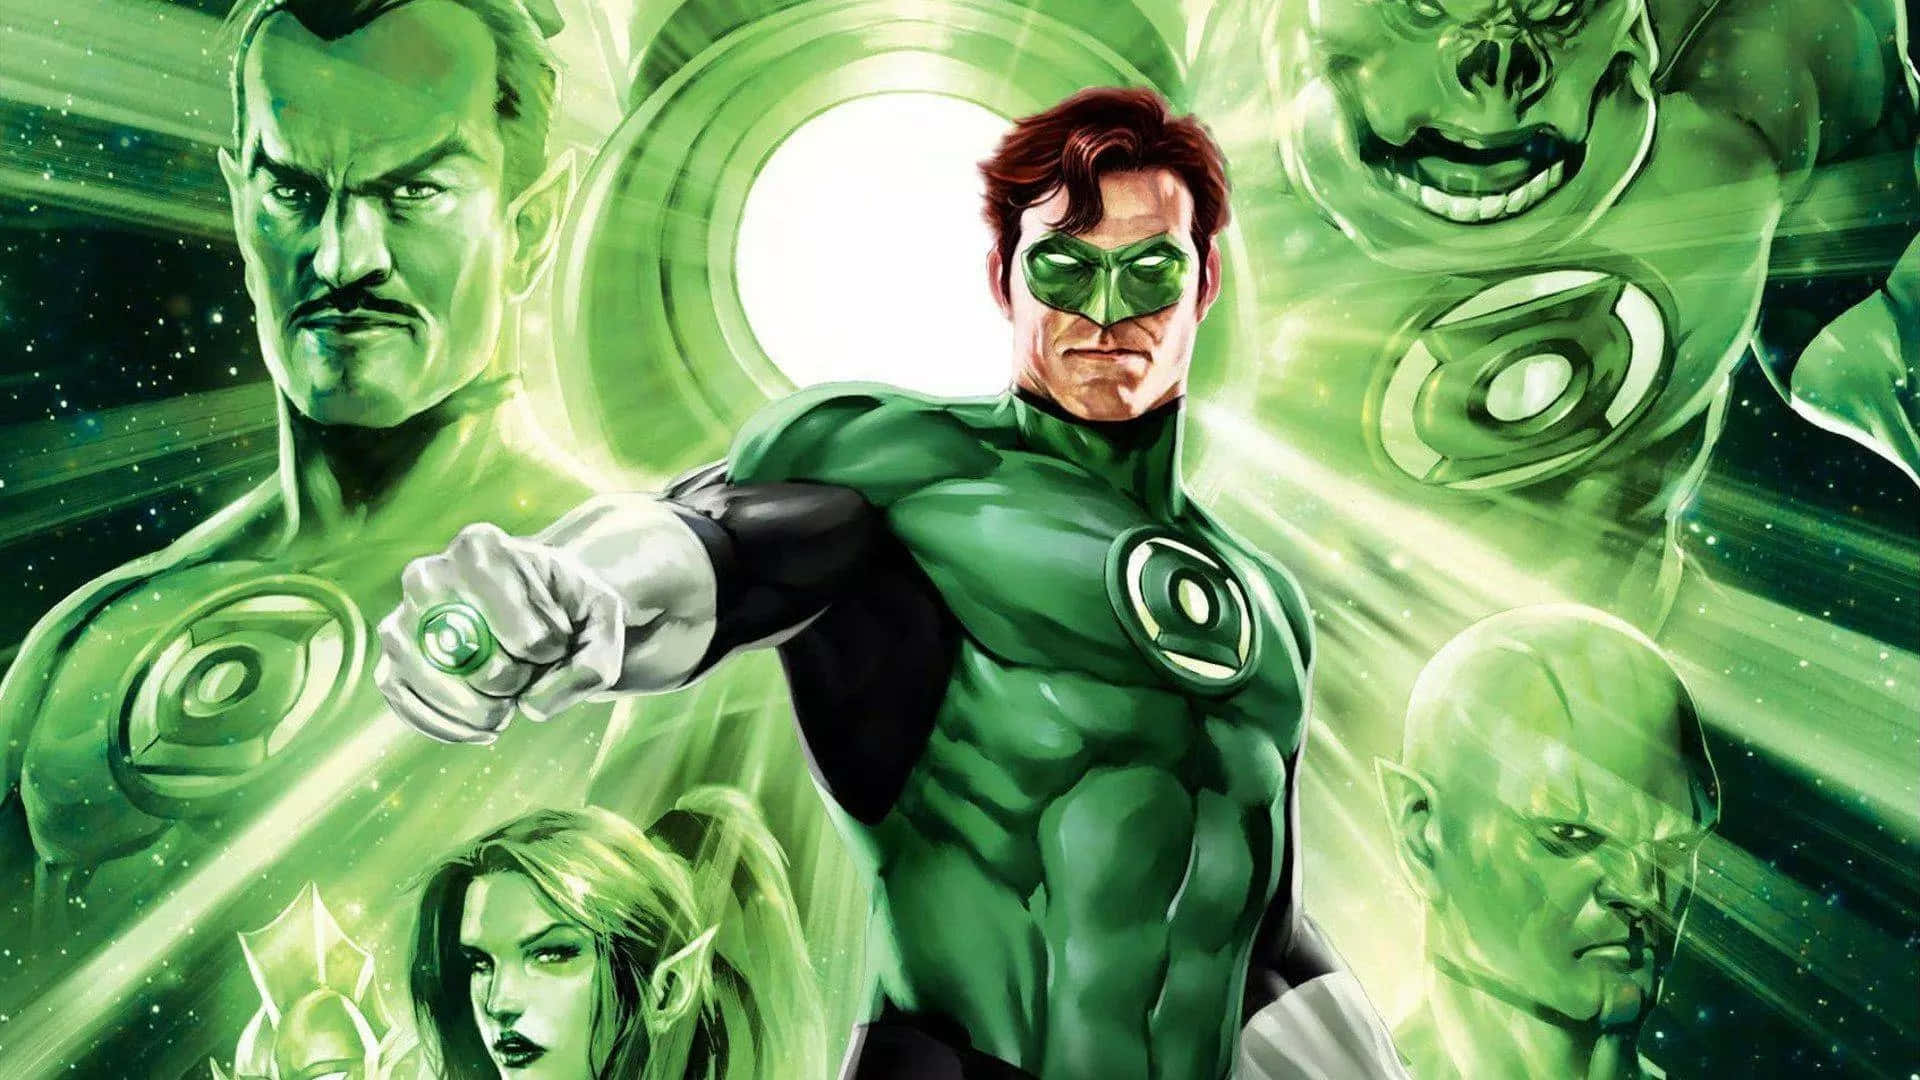 Harnessing the power of the Green Lantern Corps